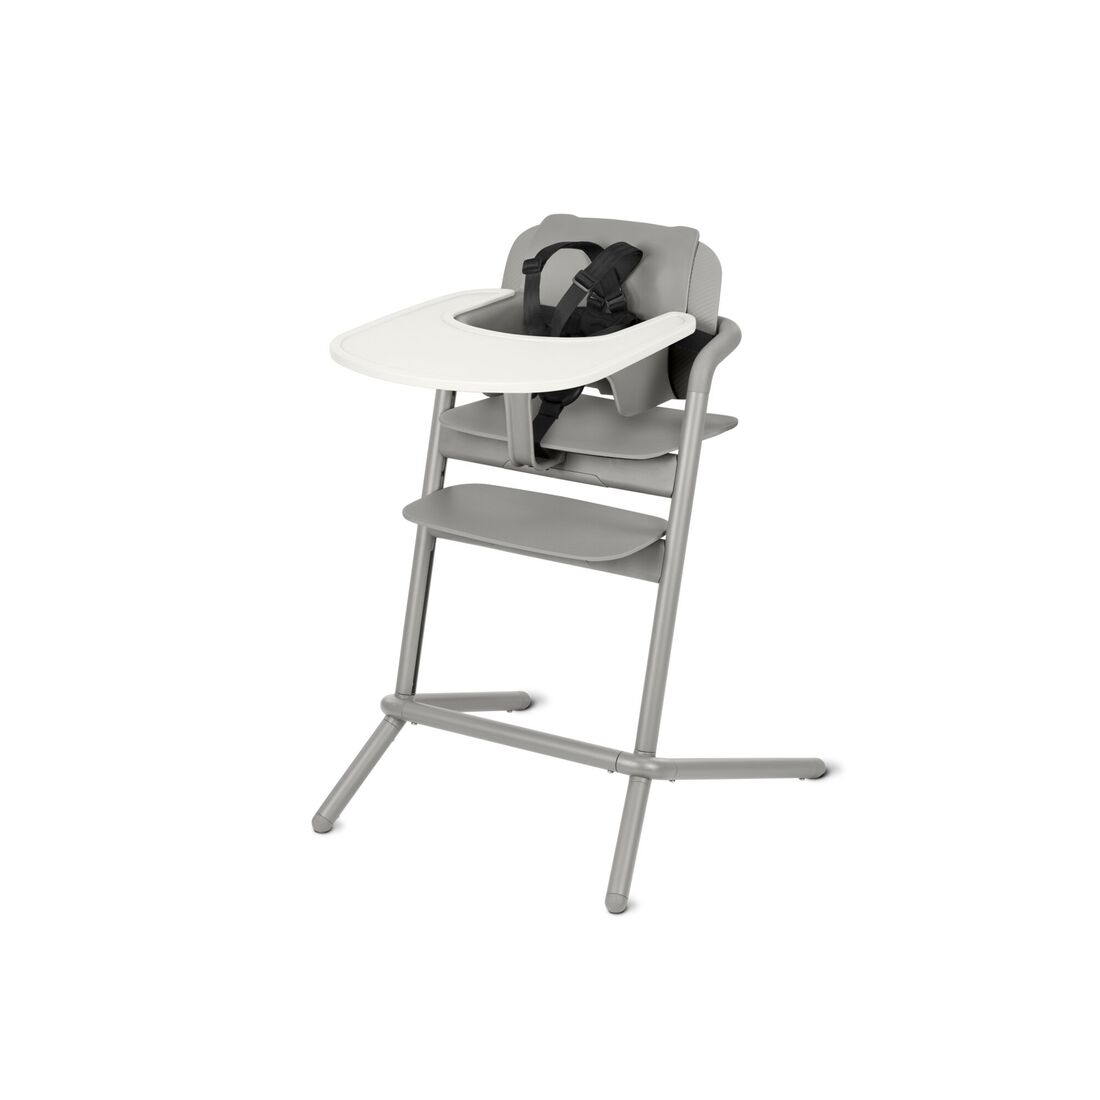 CYBEX Lemo Tray - Porcelaine White in Porcelaine White large image number 1